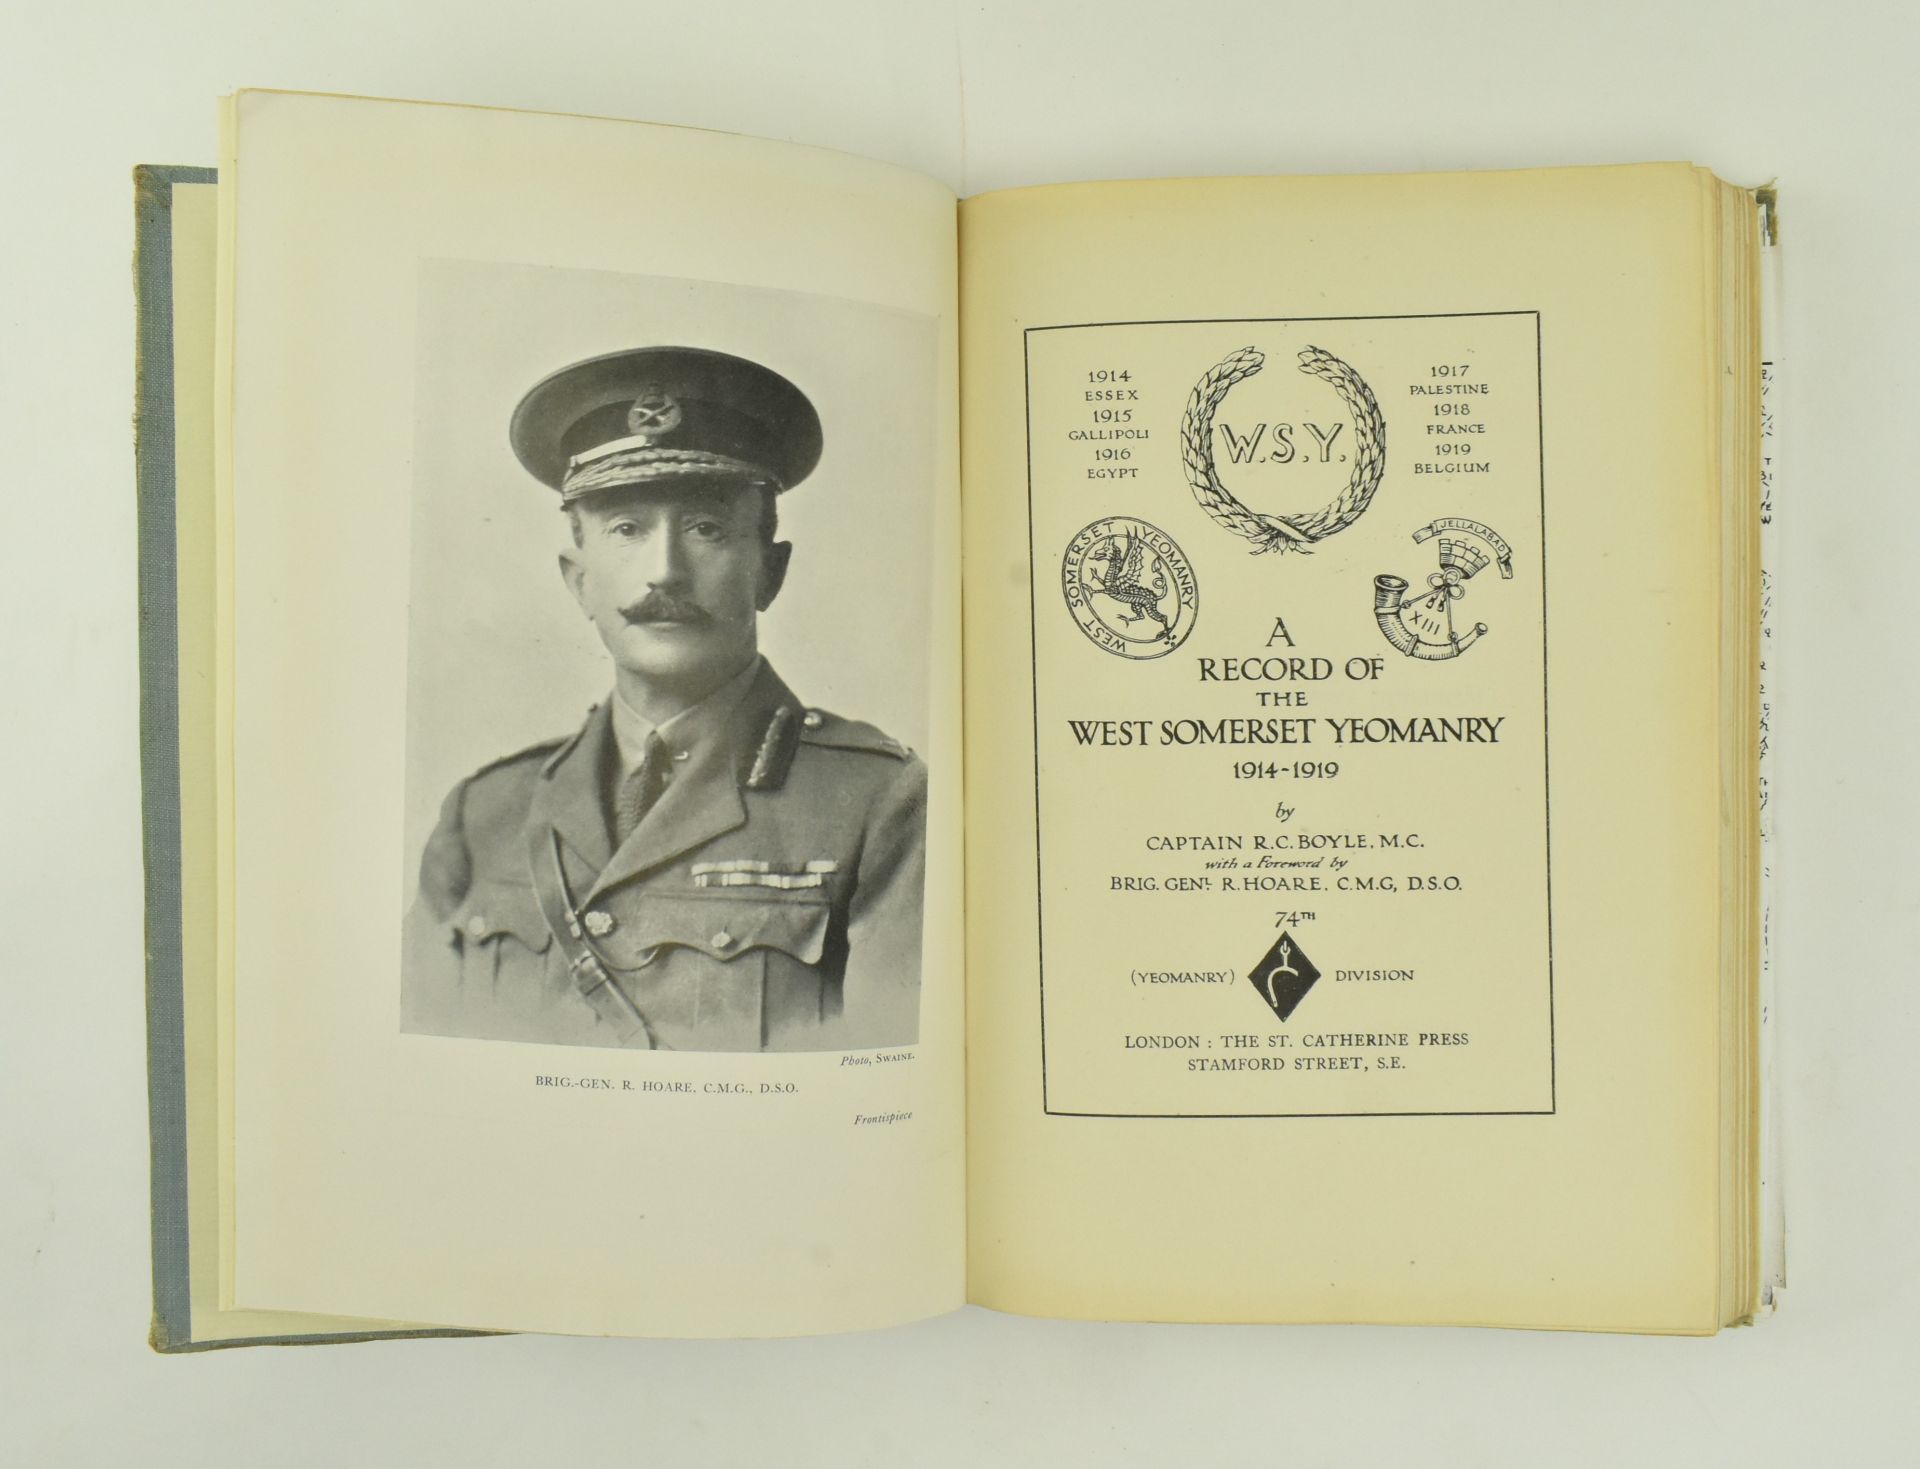 MILITARY WW1 HISTORY. COLLECTION OF 12 WORKS ON BRITISH ARMY - Image 9 of 9